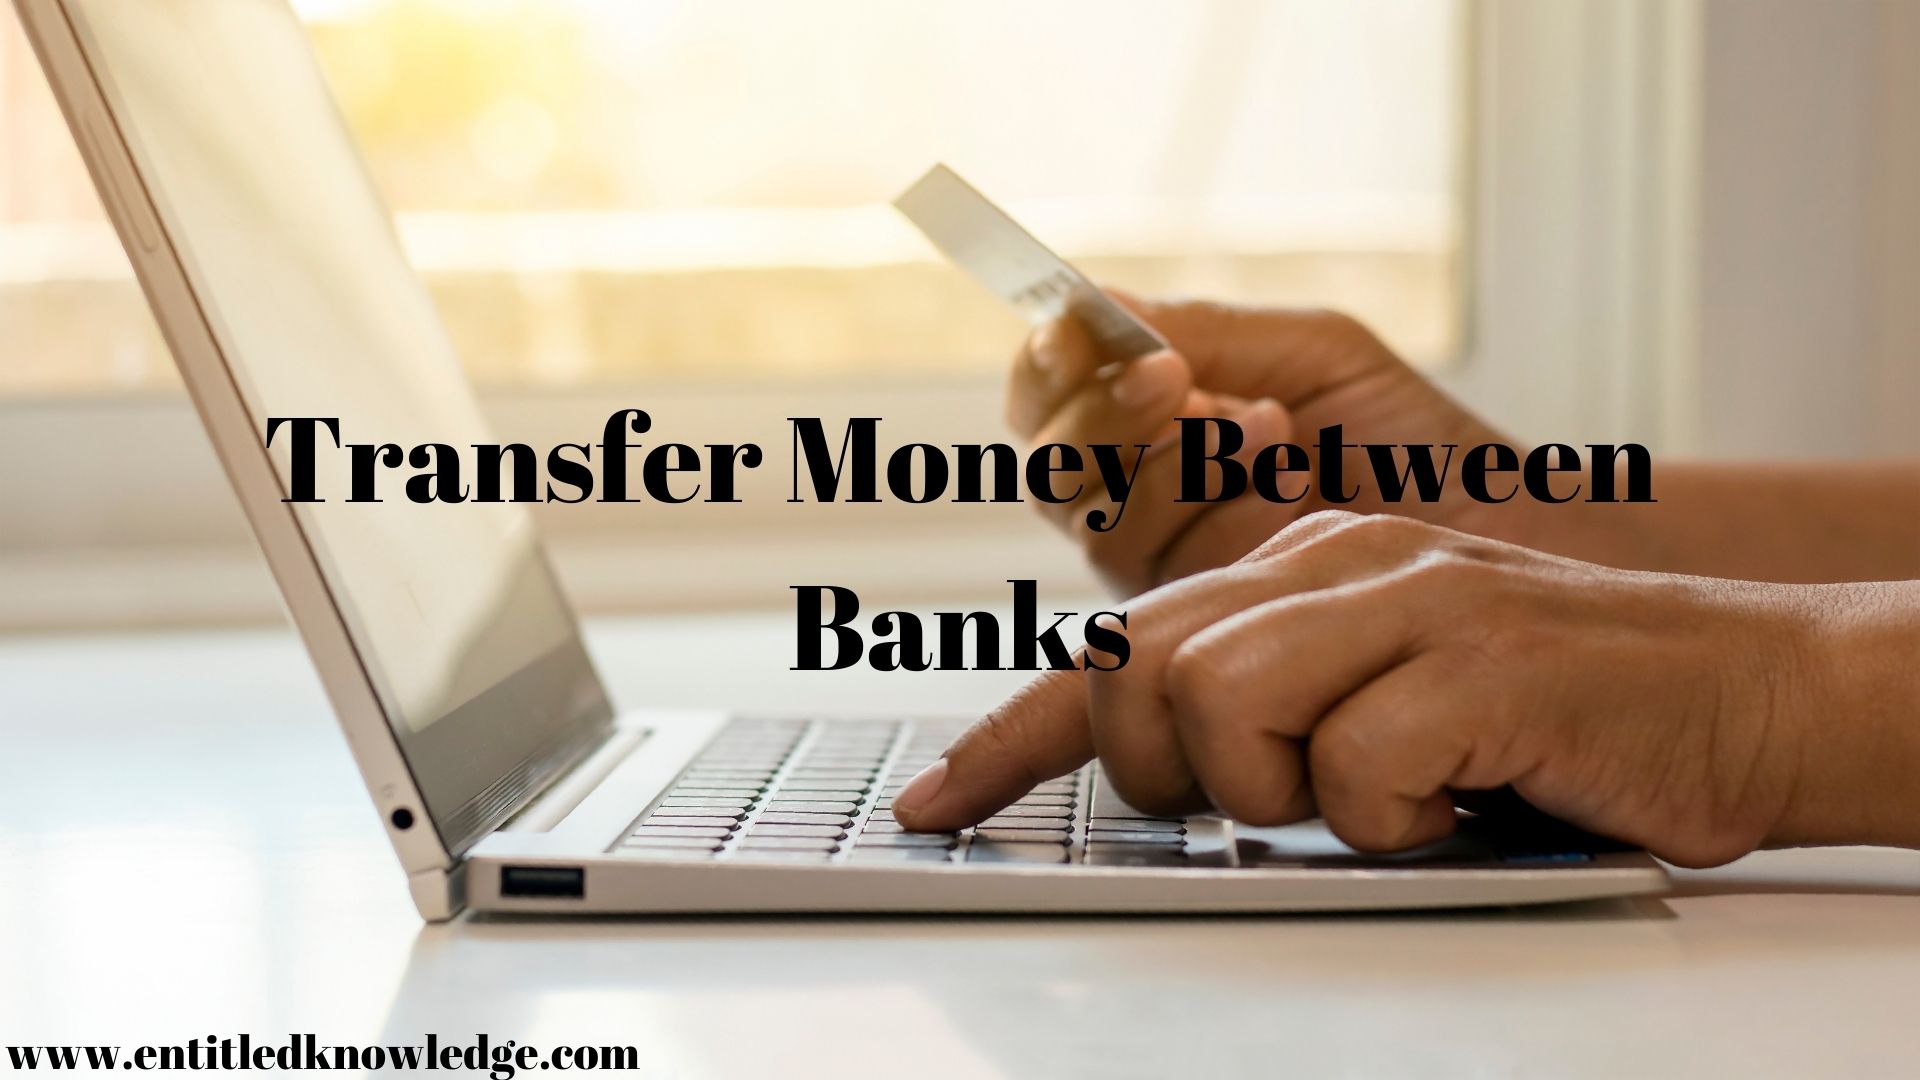 The Fastest Way To Transfer Money Between Banks